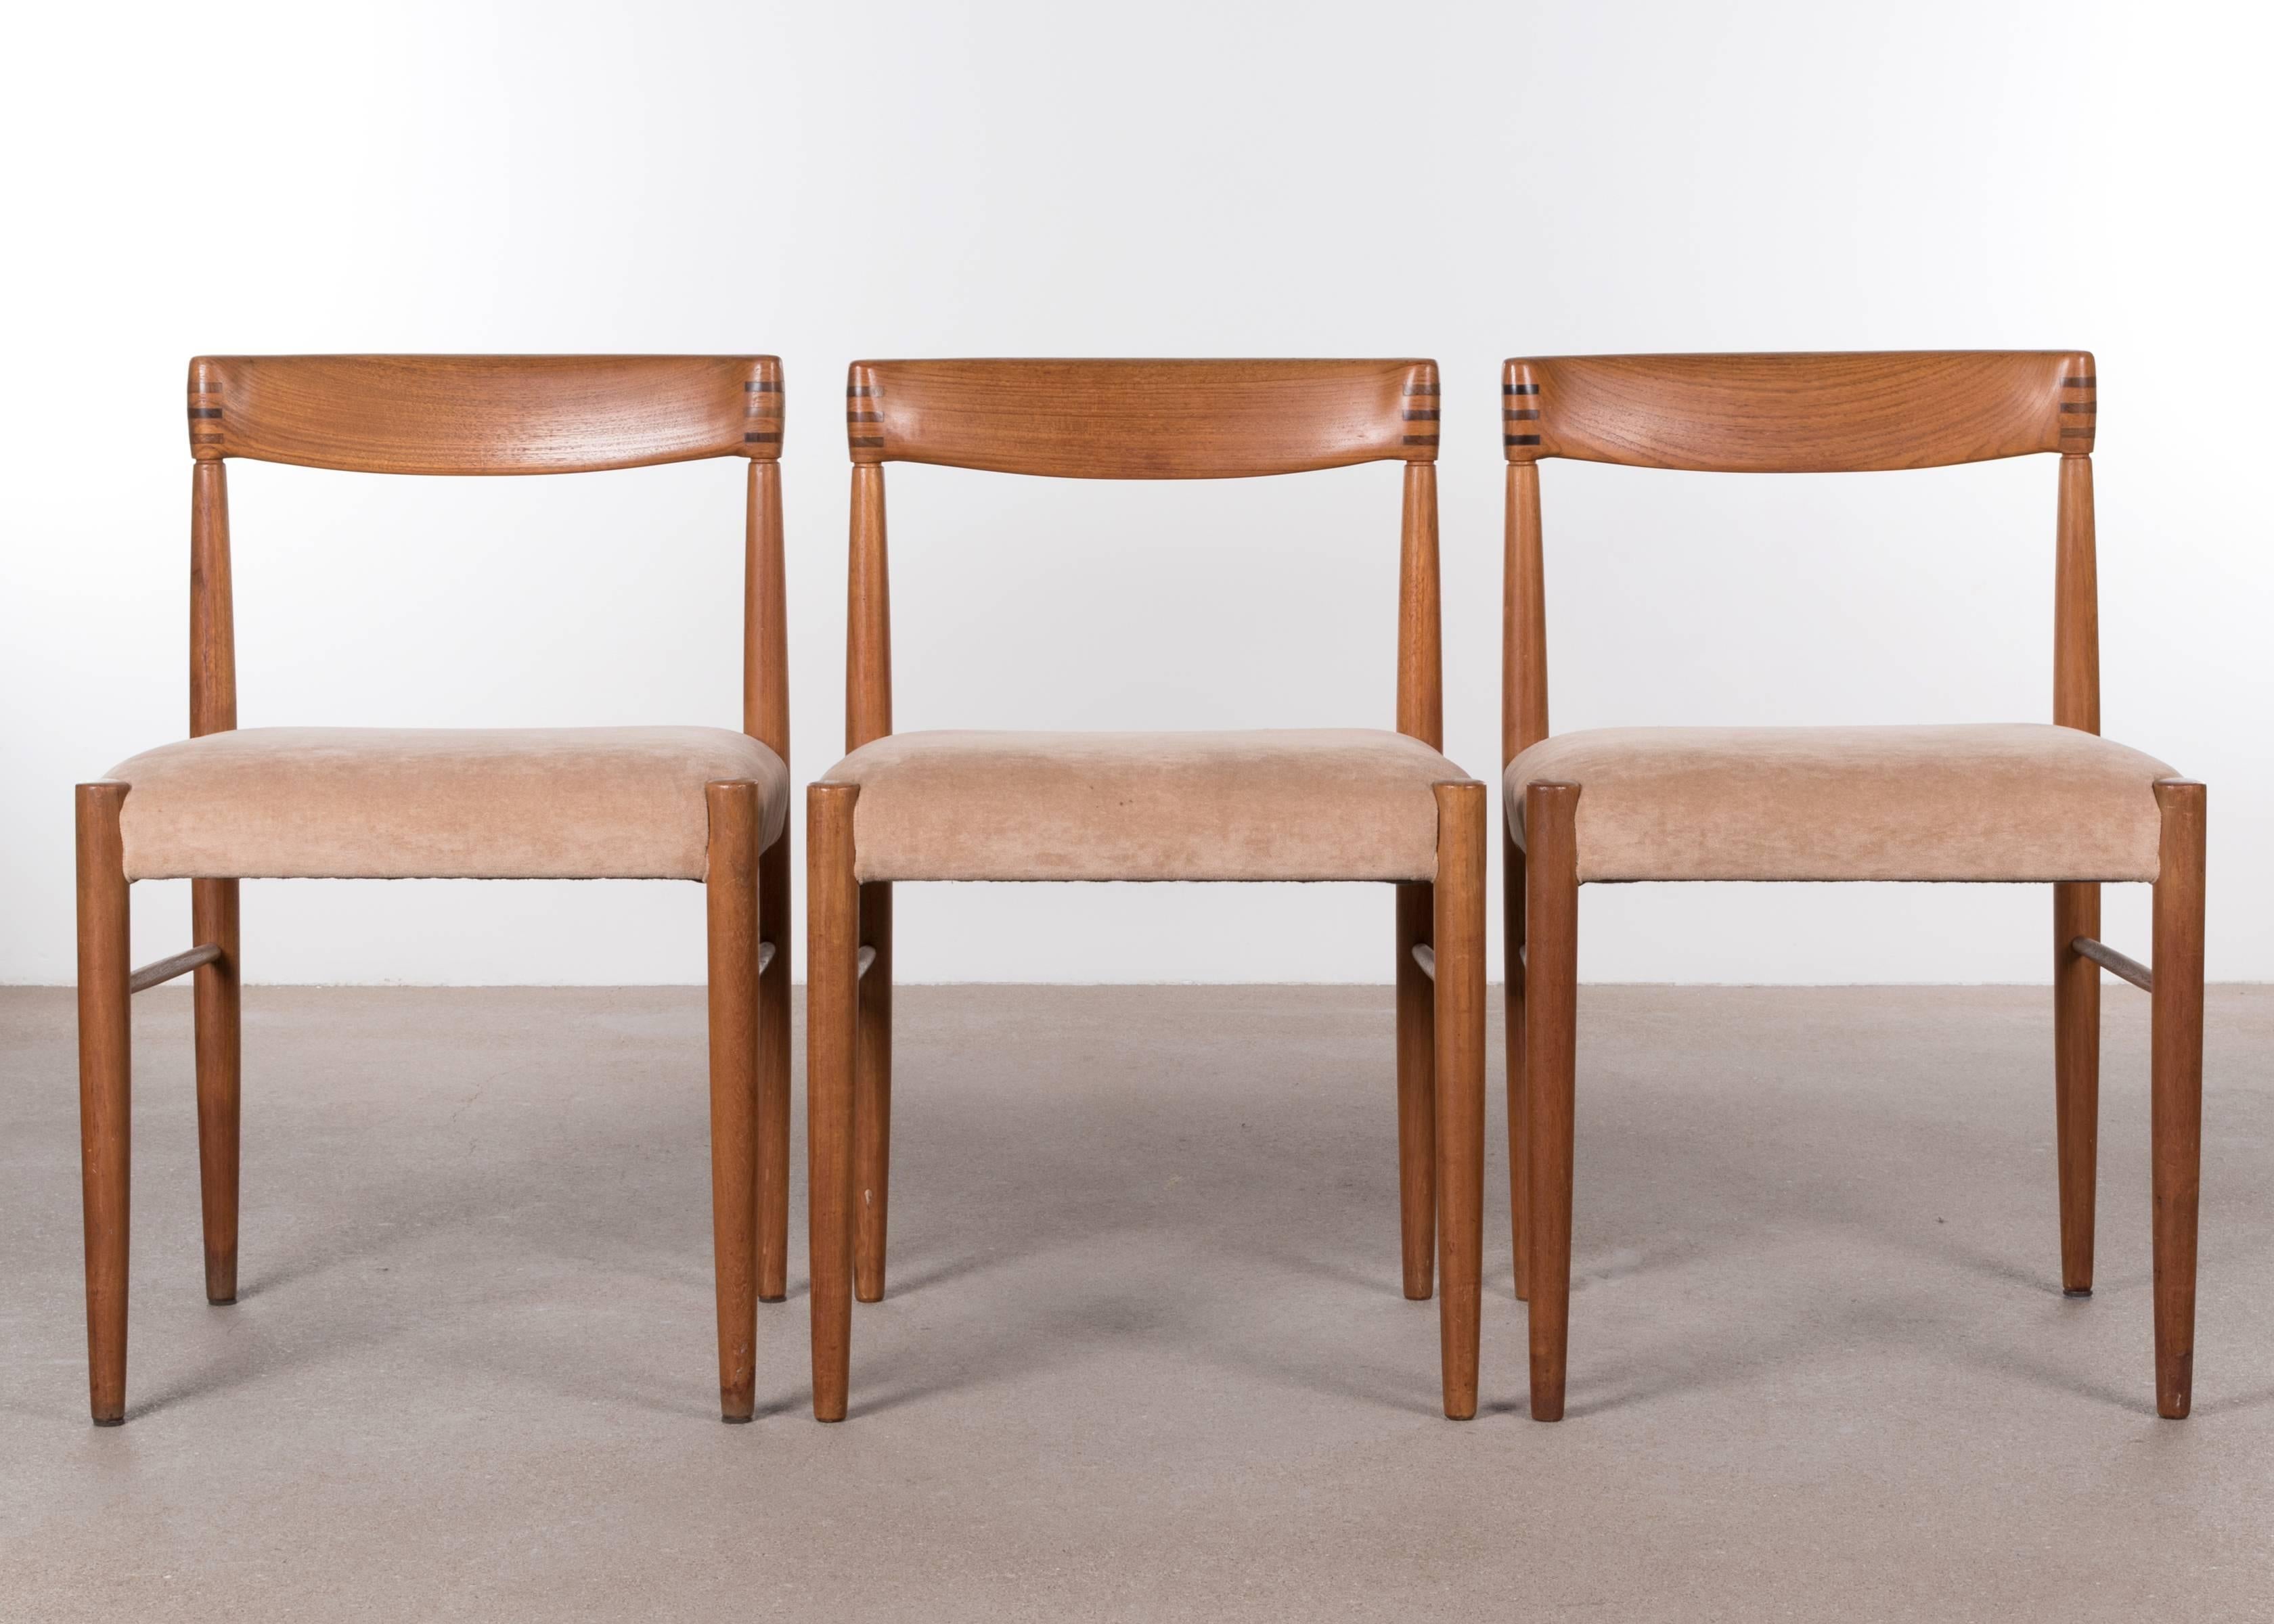 Dining chairs set by Henry Walter Klein for Bramin Mobler. Teak frames with beautiful details (joints) and elegant shapes all in original condition. Slight traces of use. Contact us for reupholstery possibilities if you desire a different fabric /